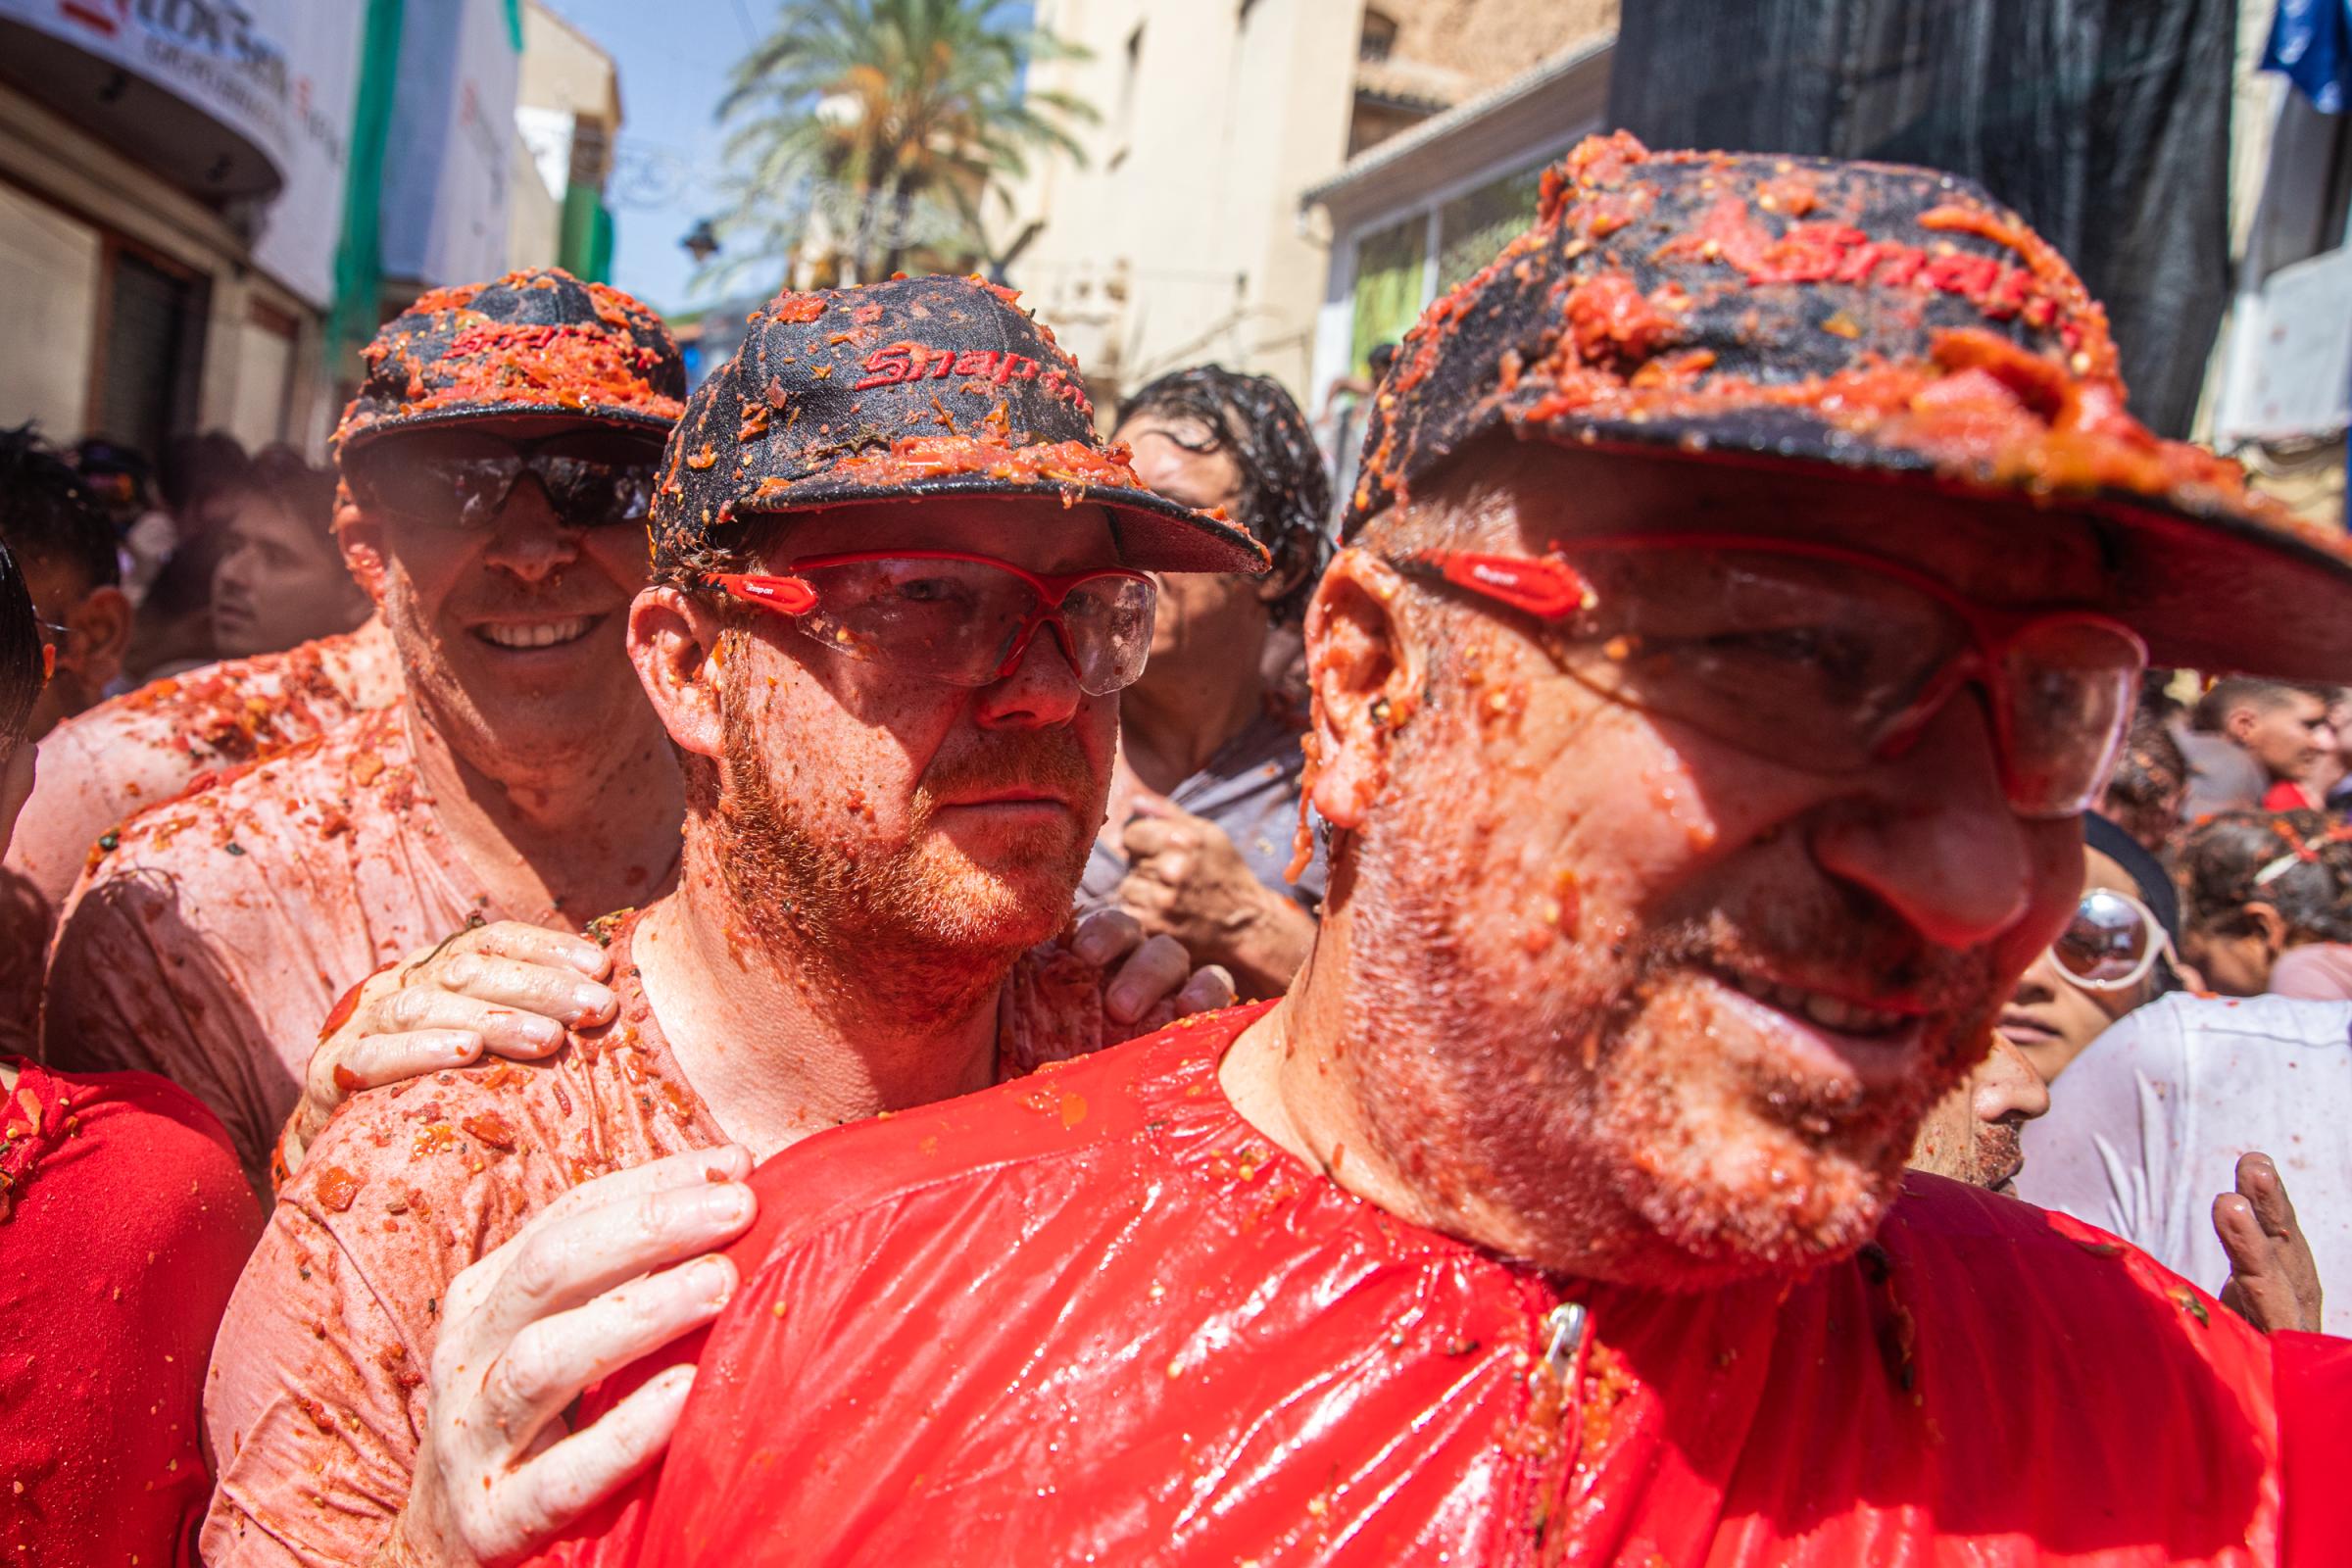 Spain's Tomato Throwing Festival Returns After Covid Hiatus For The 75th Edition - BUNOL, SPAIN - AUGUST 31: Revelers celebrate and throw...